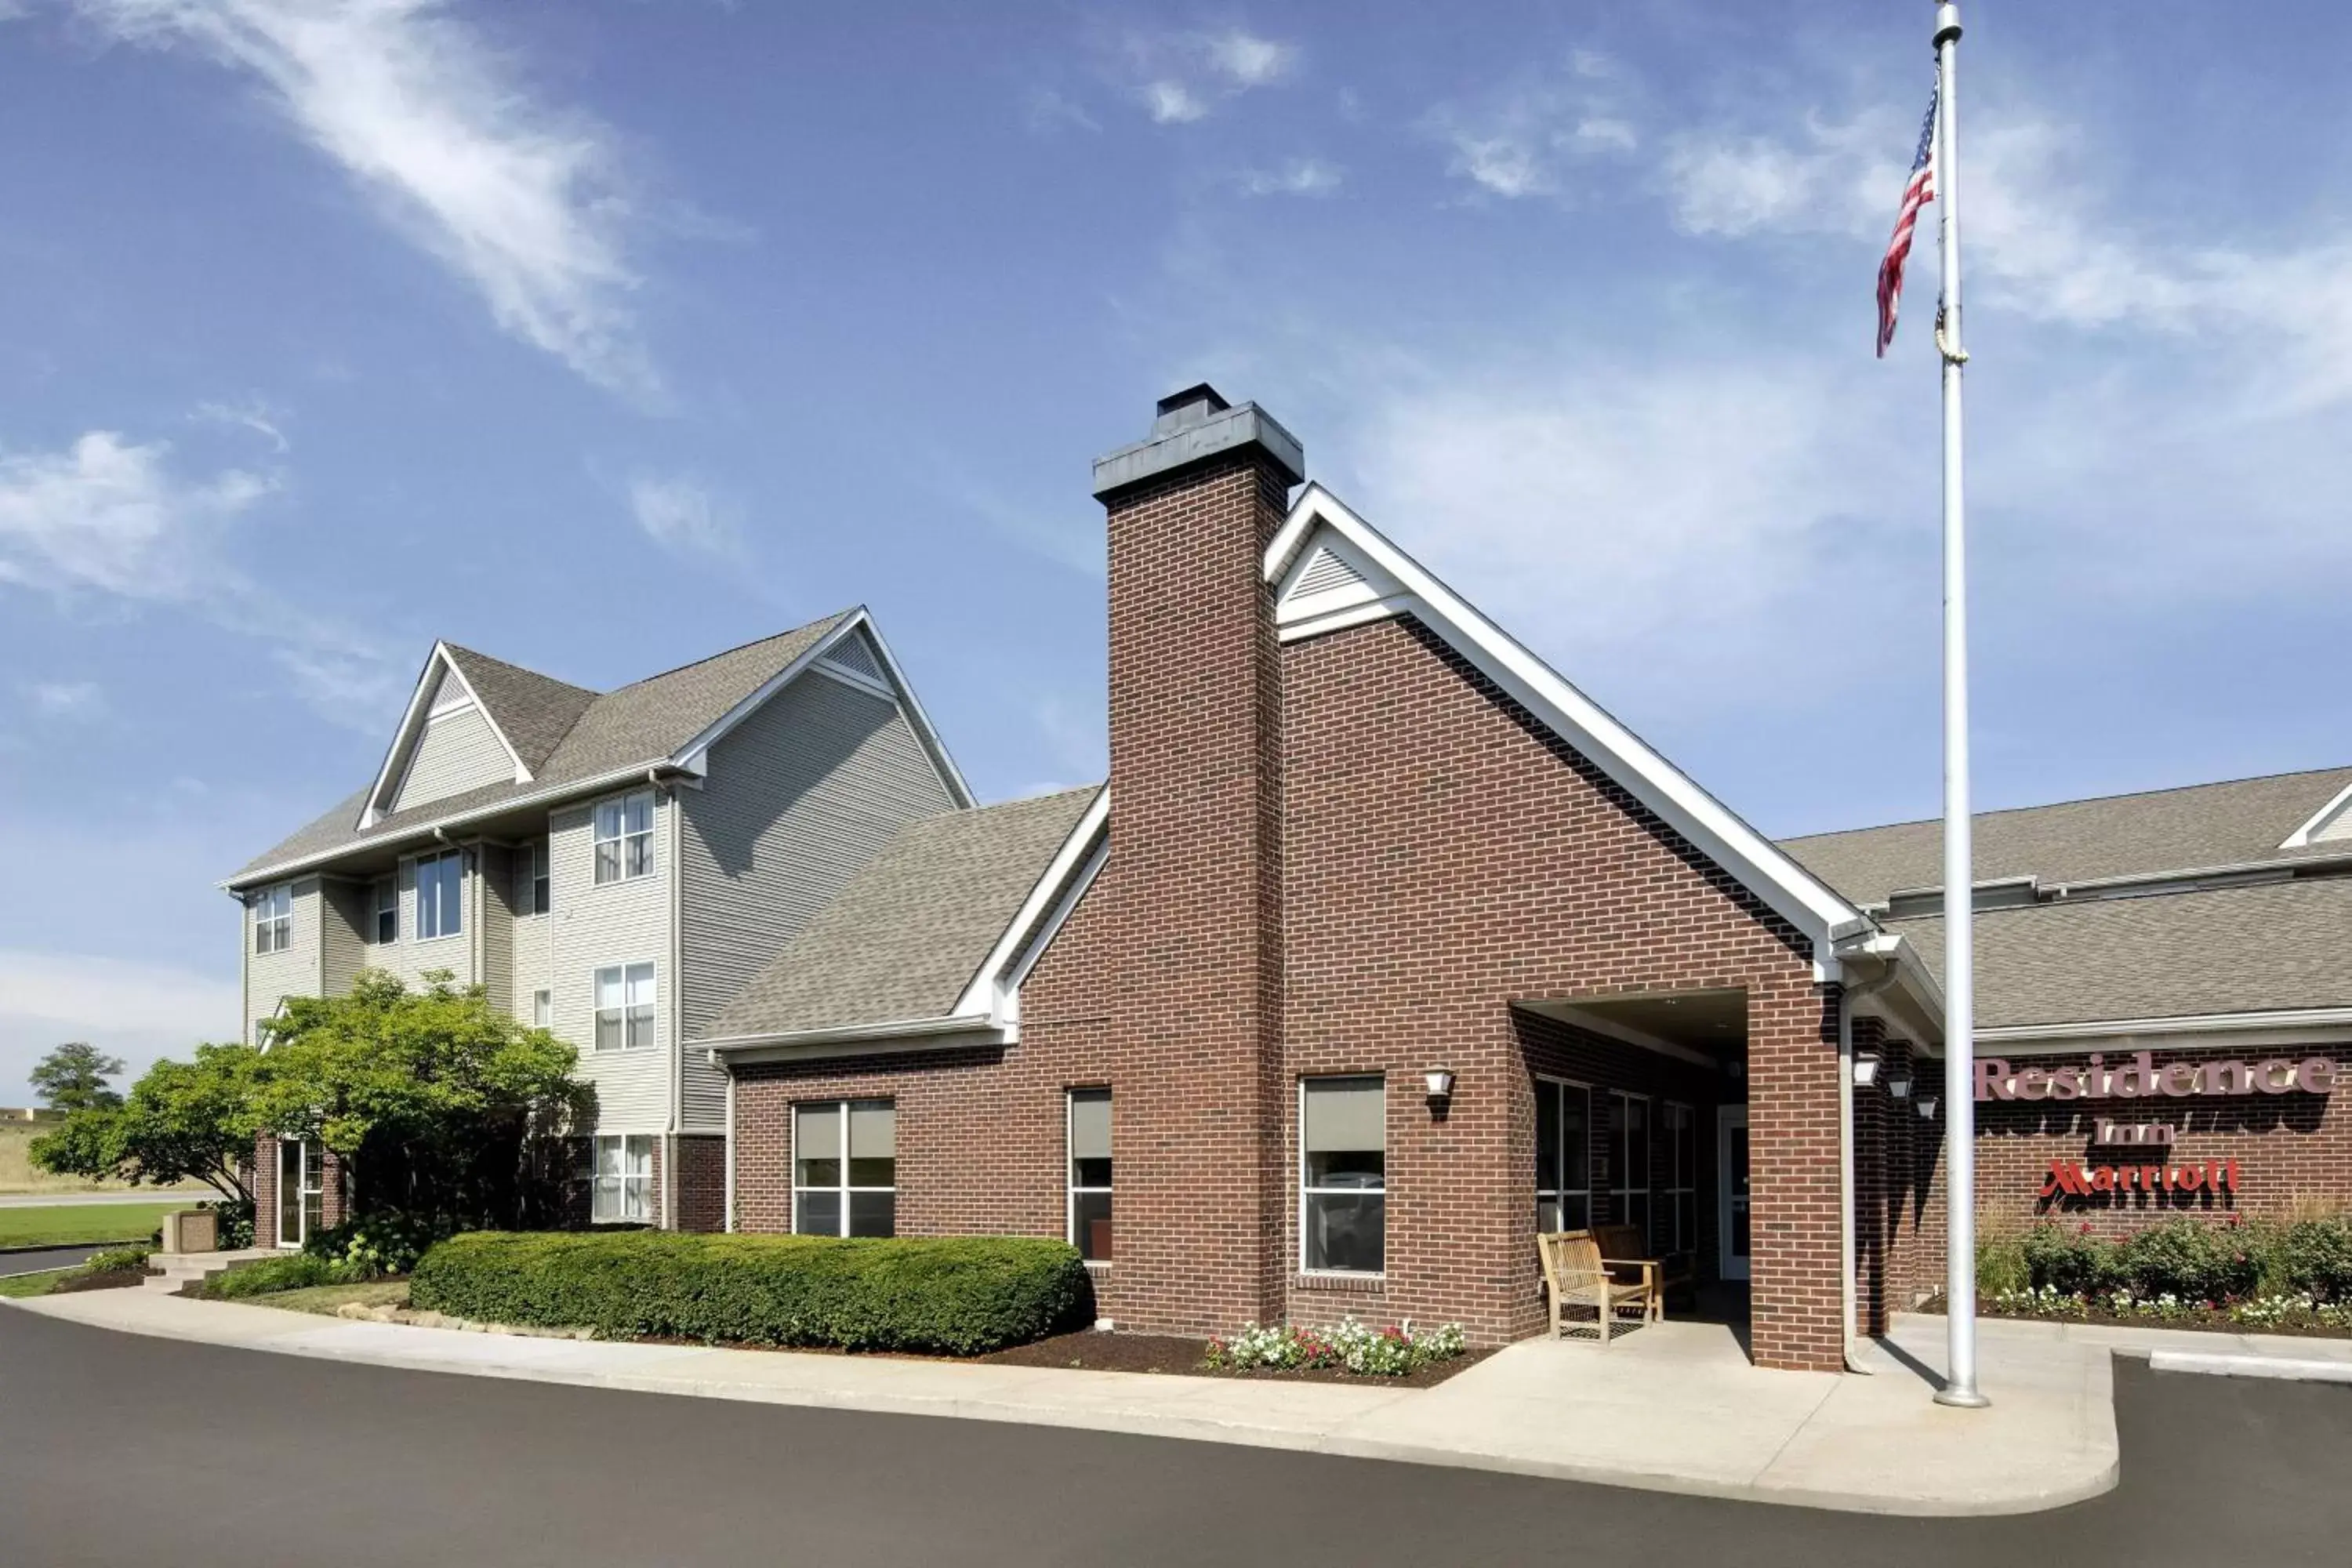 Property Building in Residence Inn Indianapolis Airport